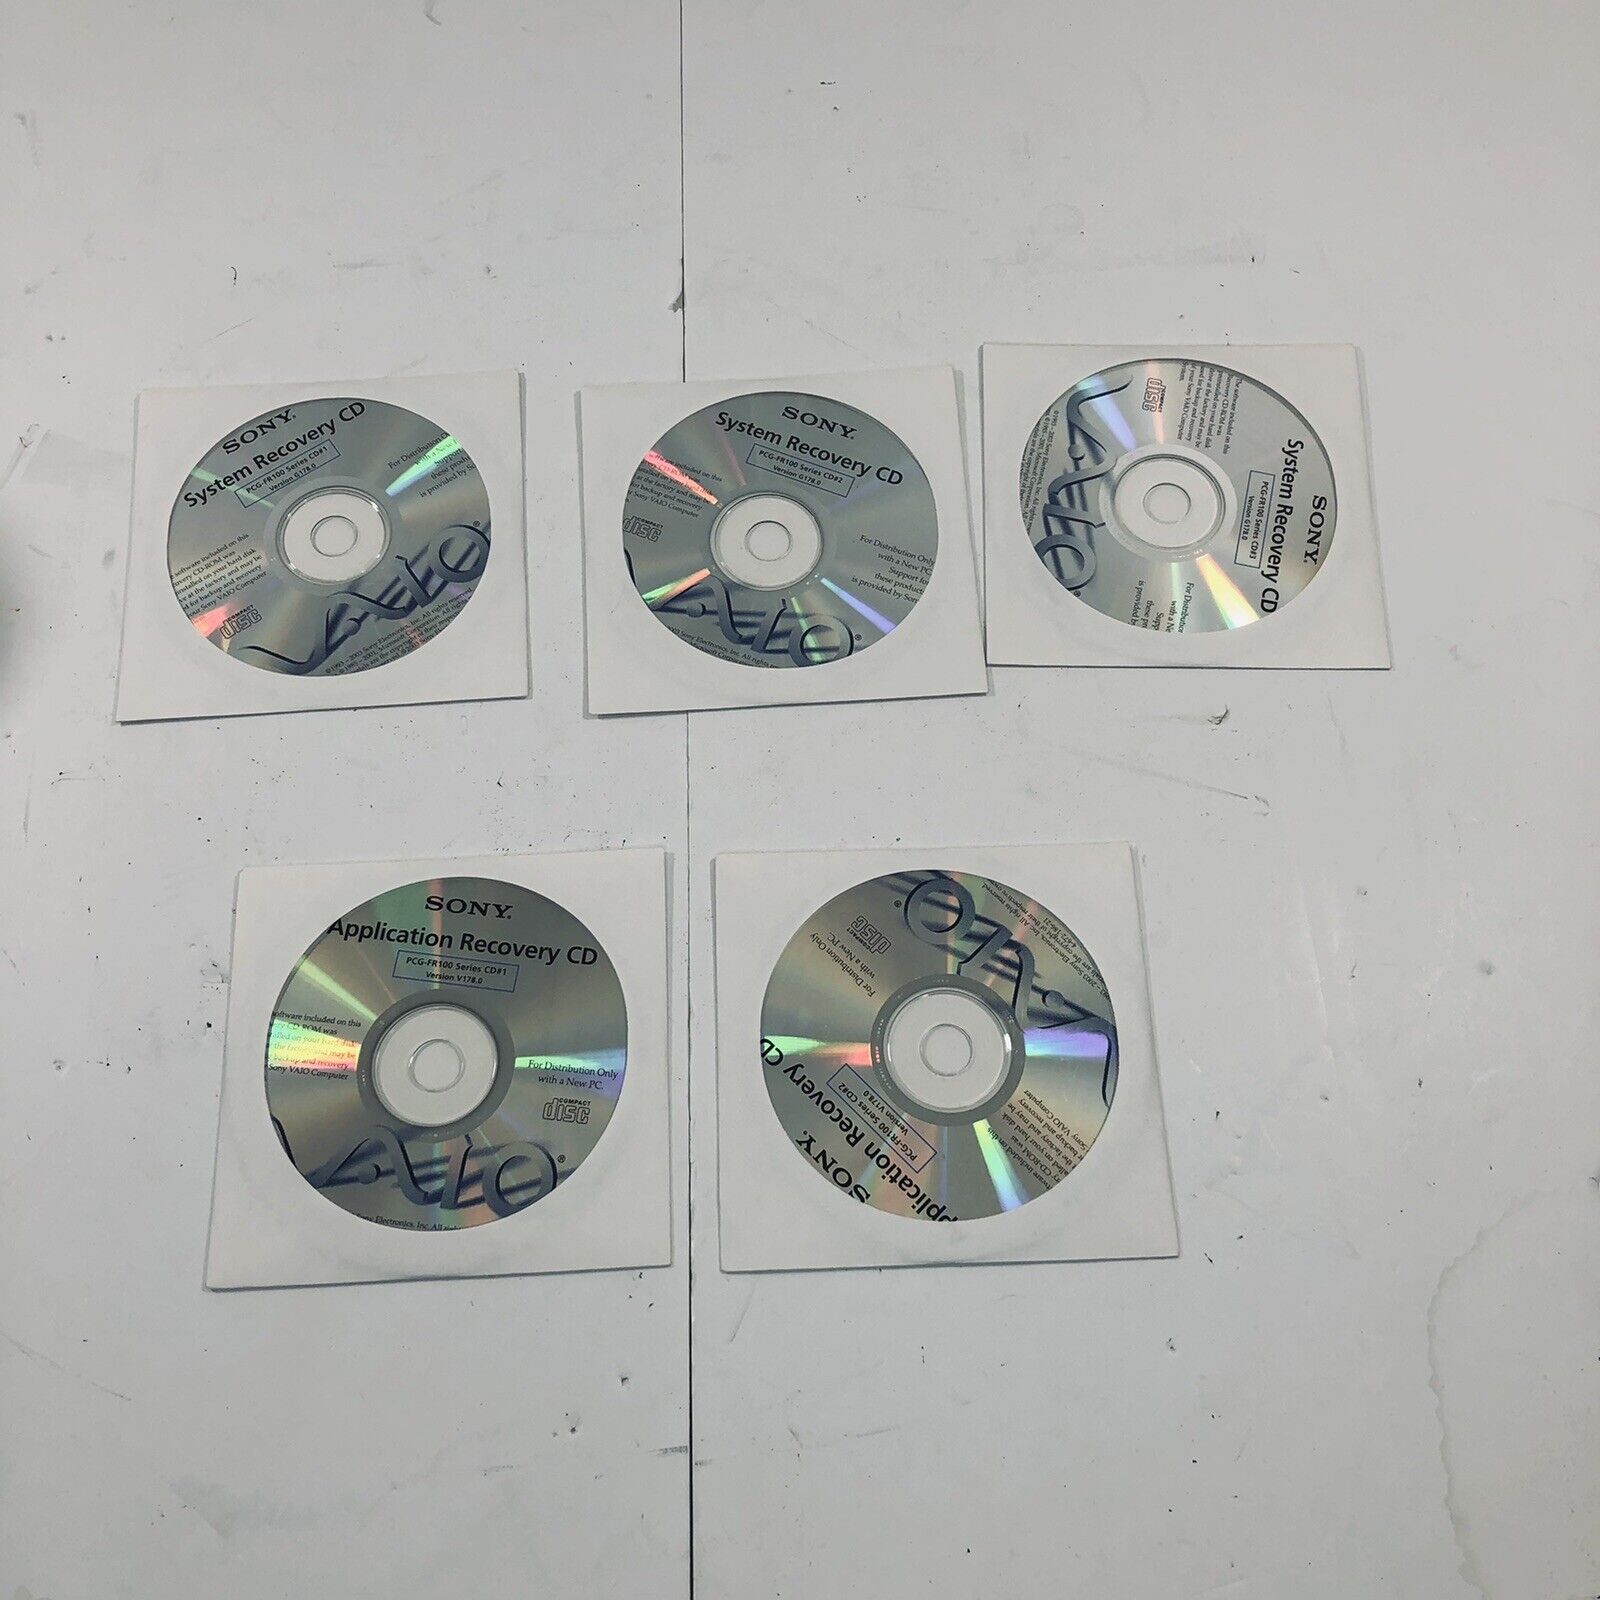 Sony VAIO PCG-FR100 Series Recovery CD System Set of 5 Application CD #3 Missing